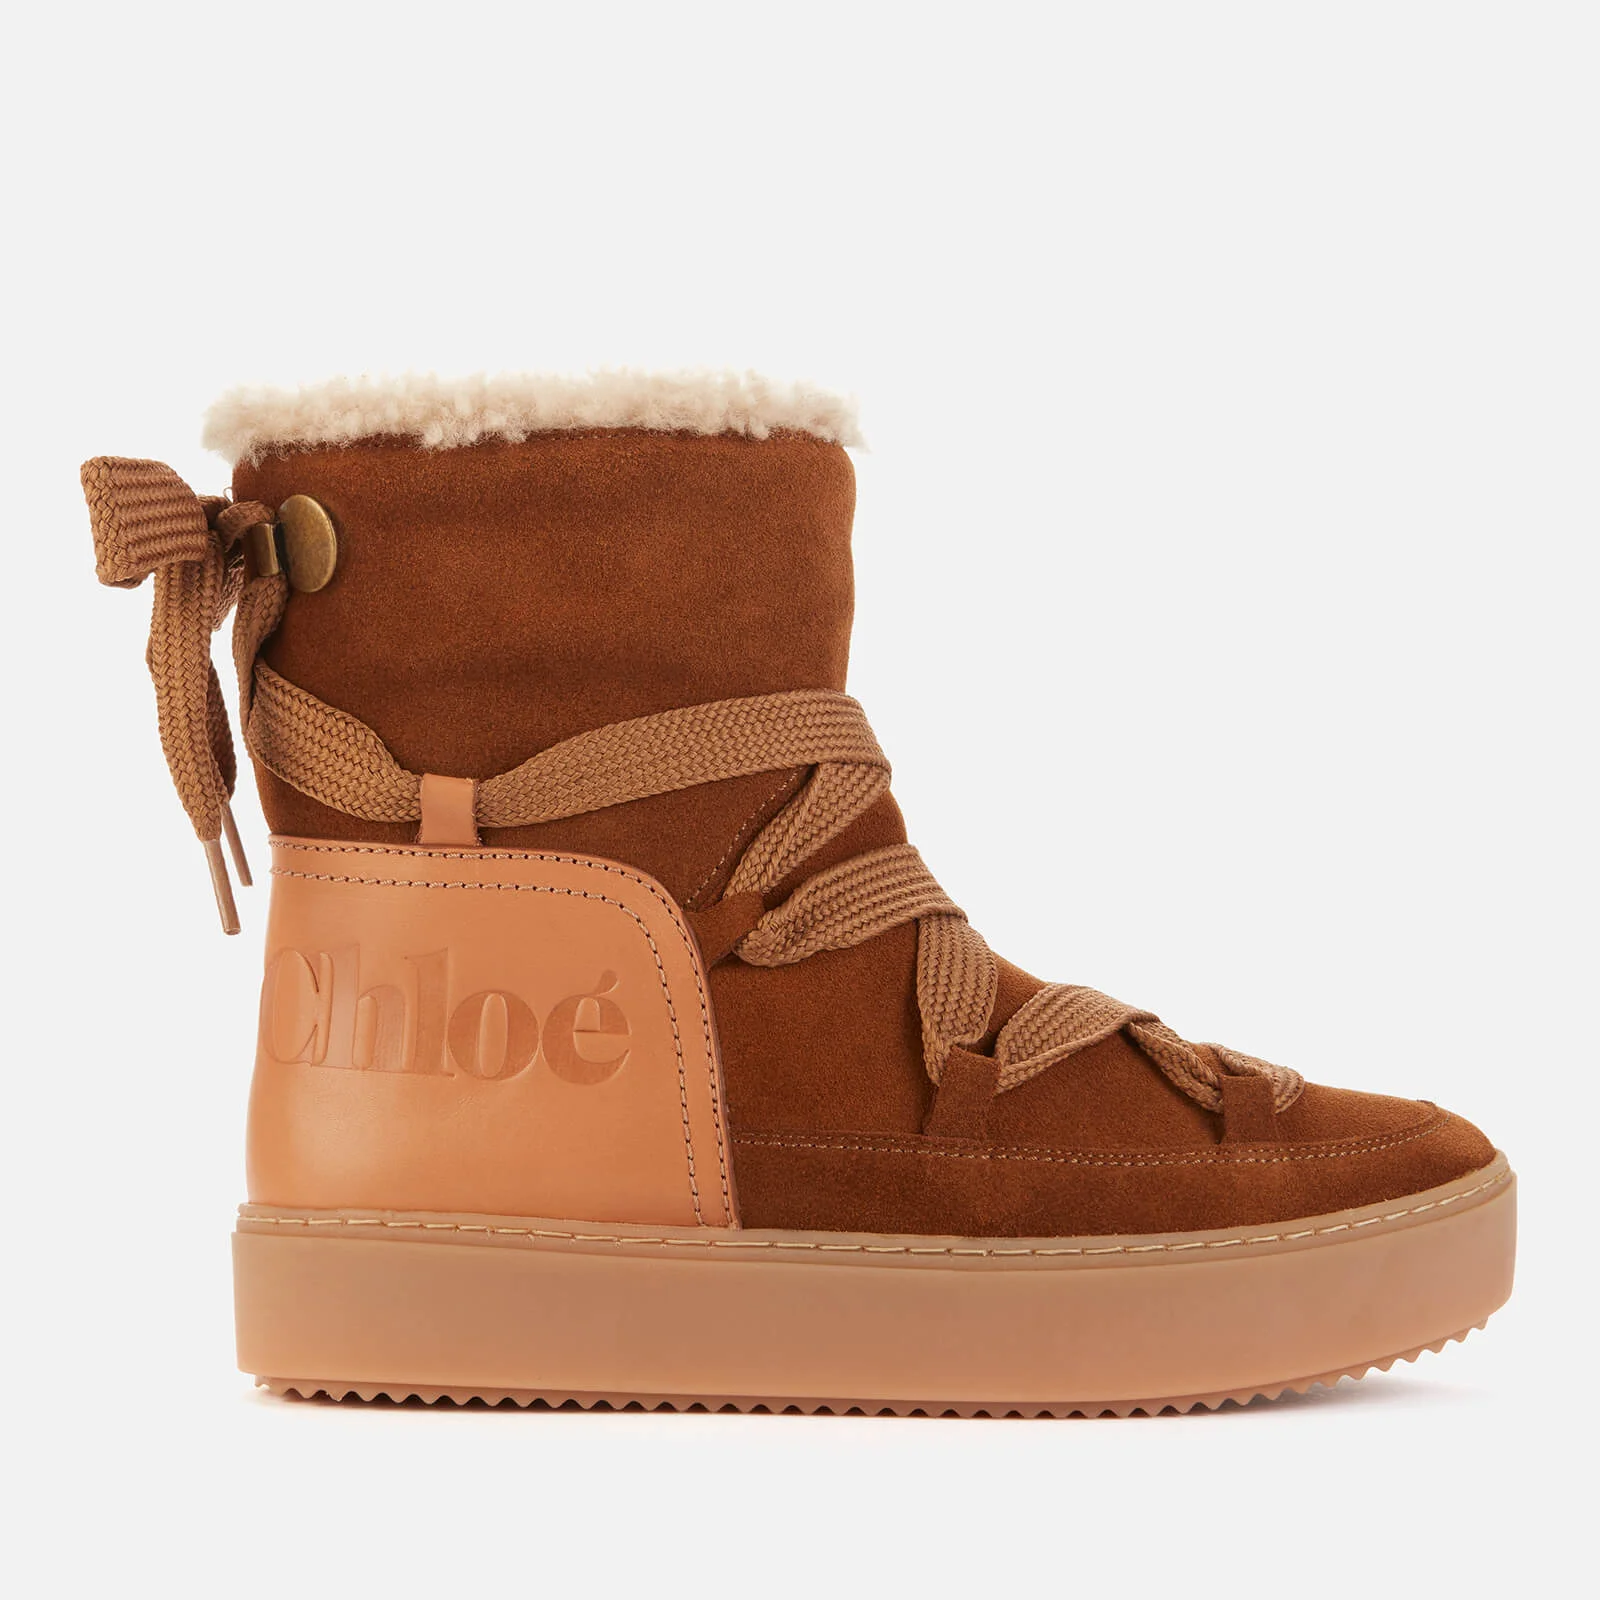 See By Chloé Women's Suede/Leather Snow Boots - Tan Image 1